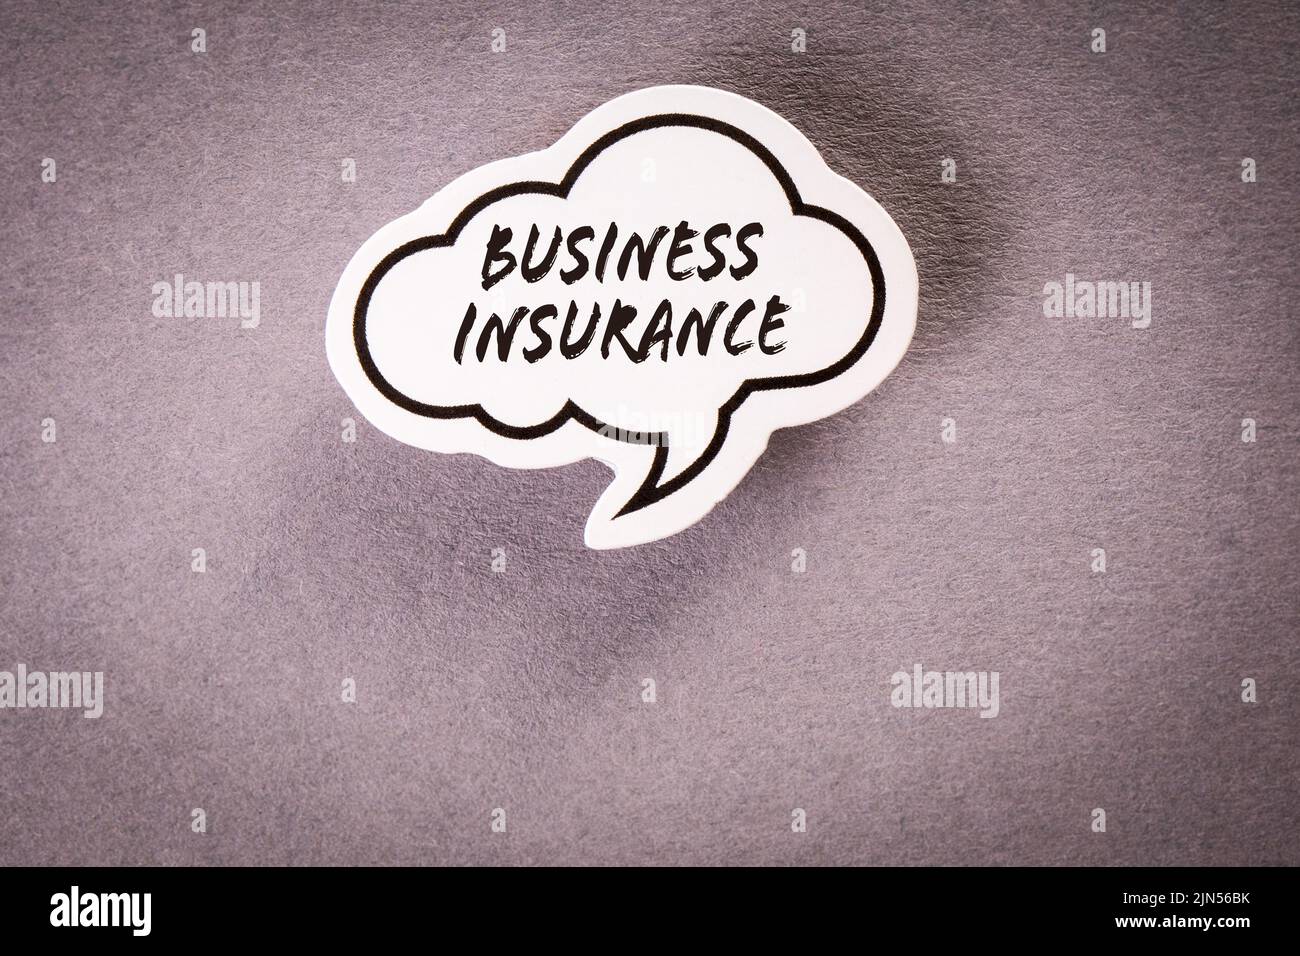 Business insurance. Speech bubble with text on gray background. Stock Photo